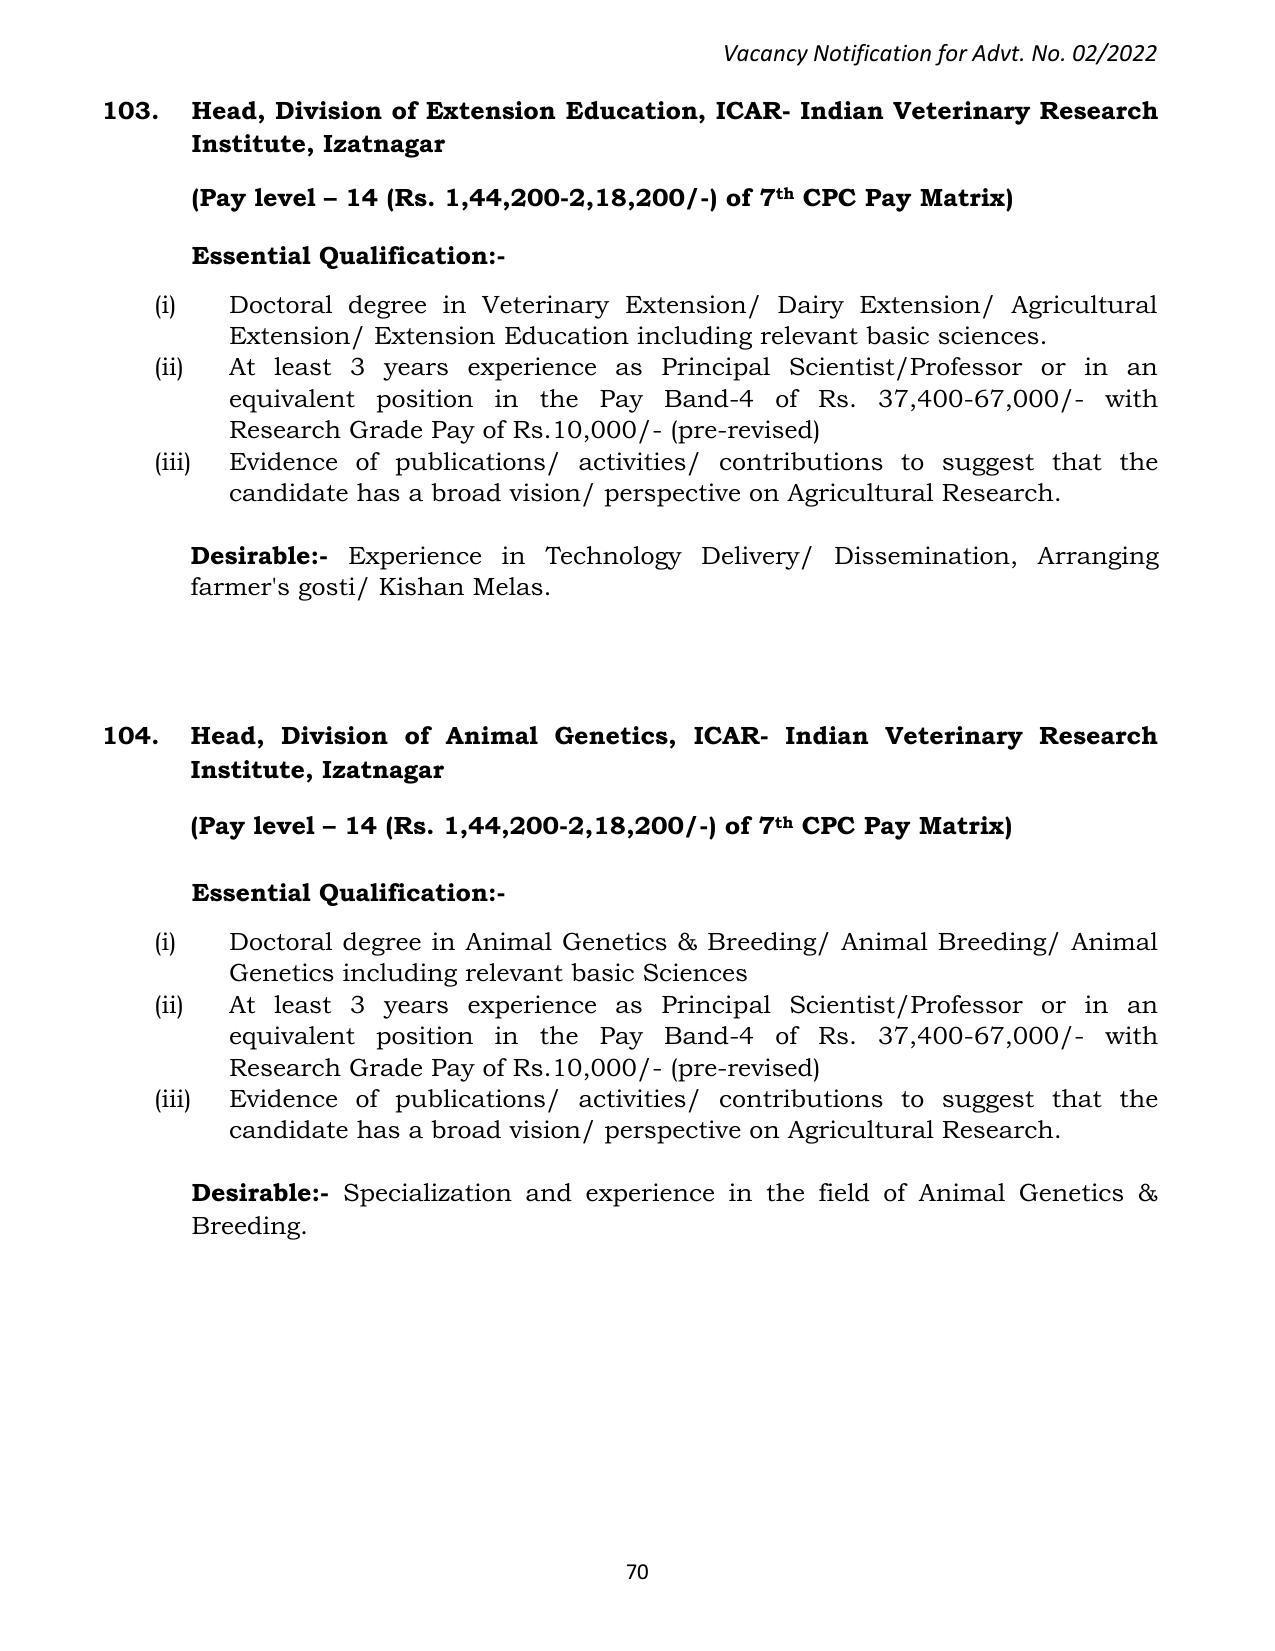 ASRB Non-Research Management Recruitment 2022 - Page 19